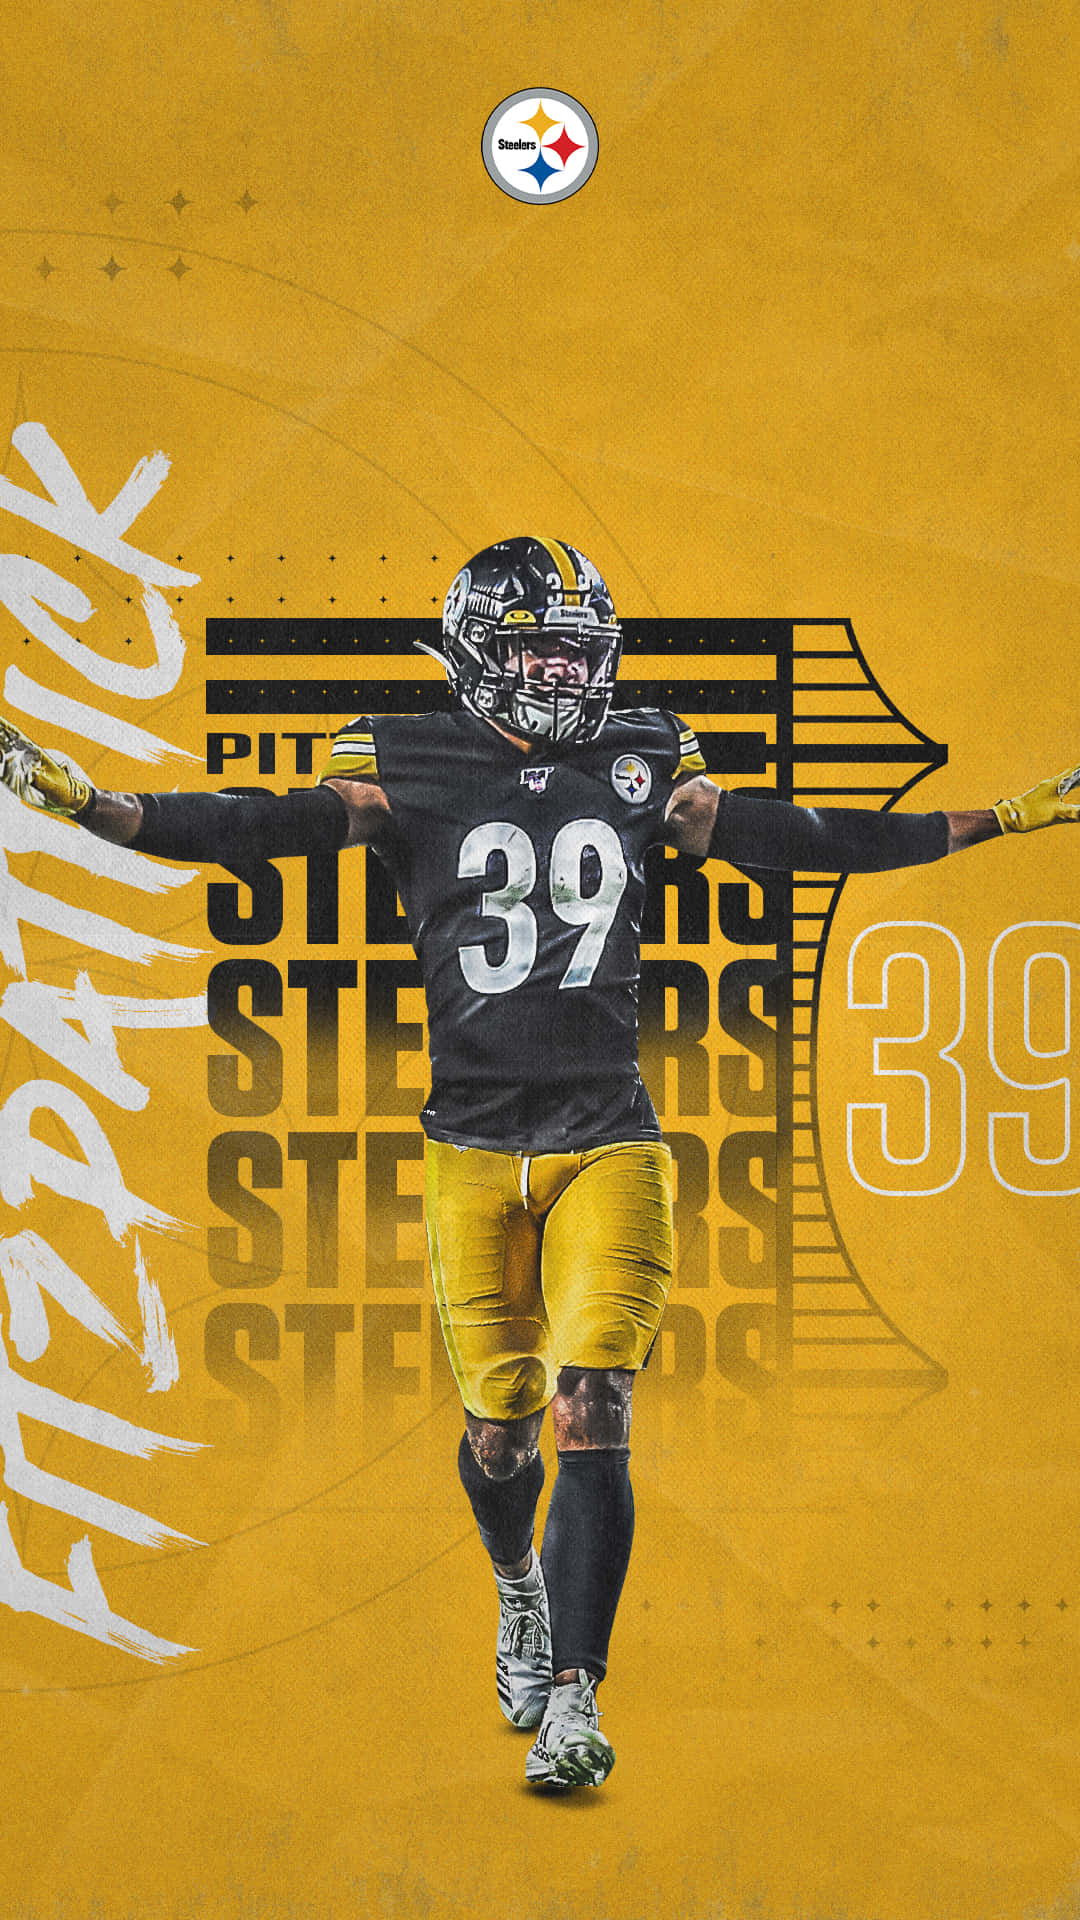 The official logo of the NFL's Pittsburgh Steelers team Wallpaper